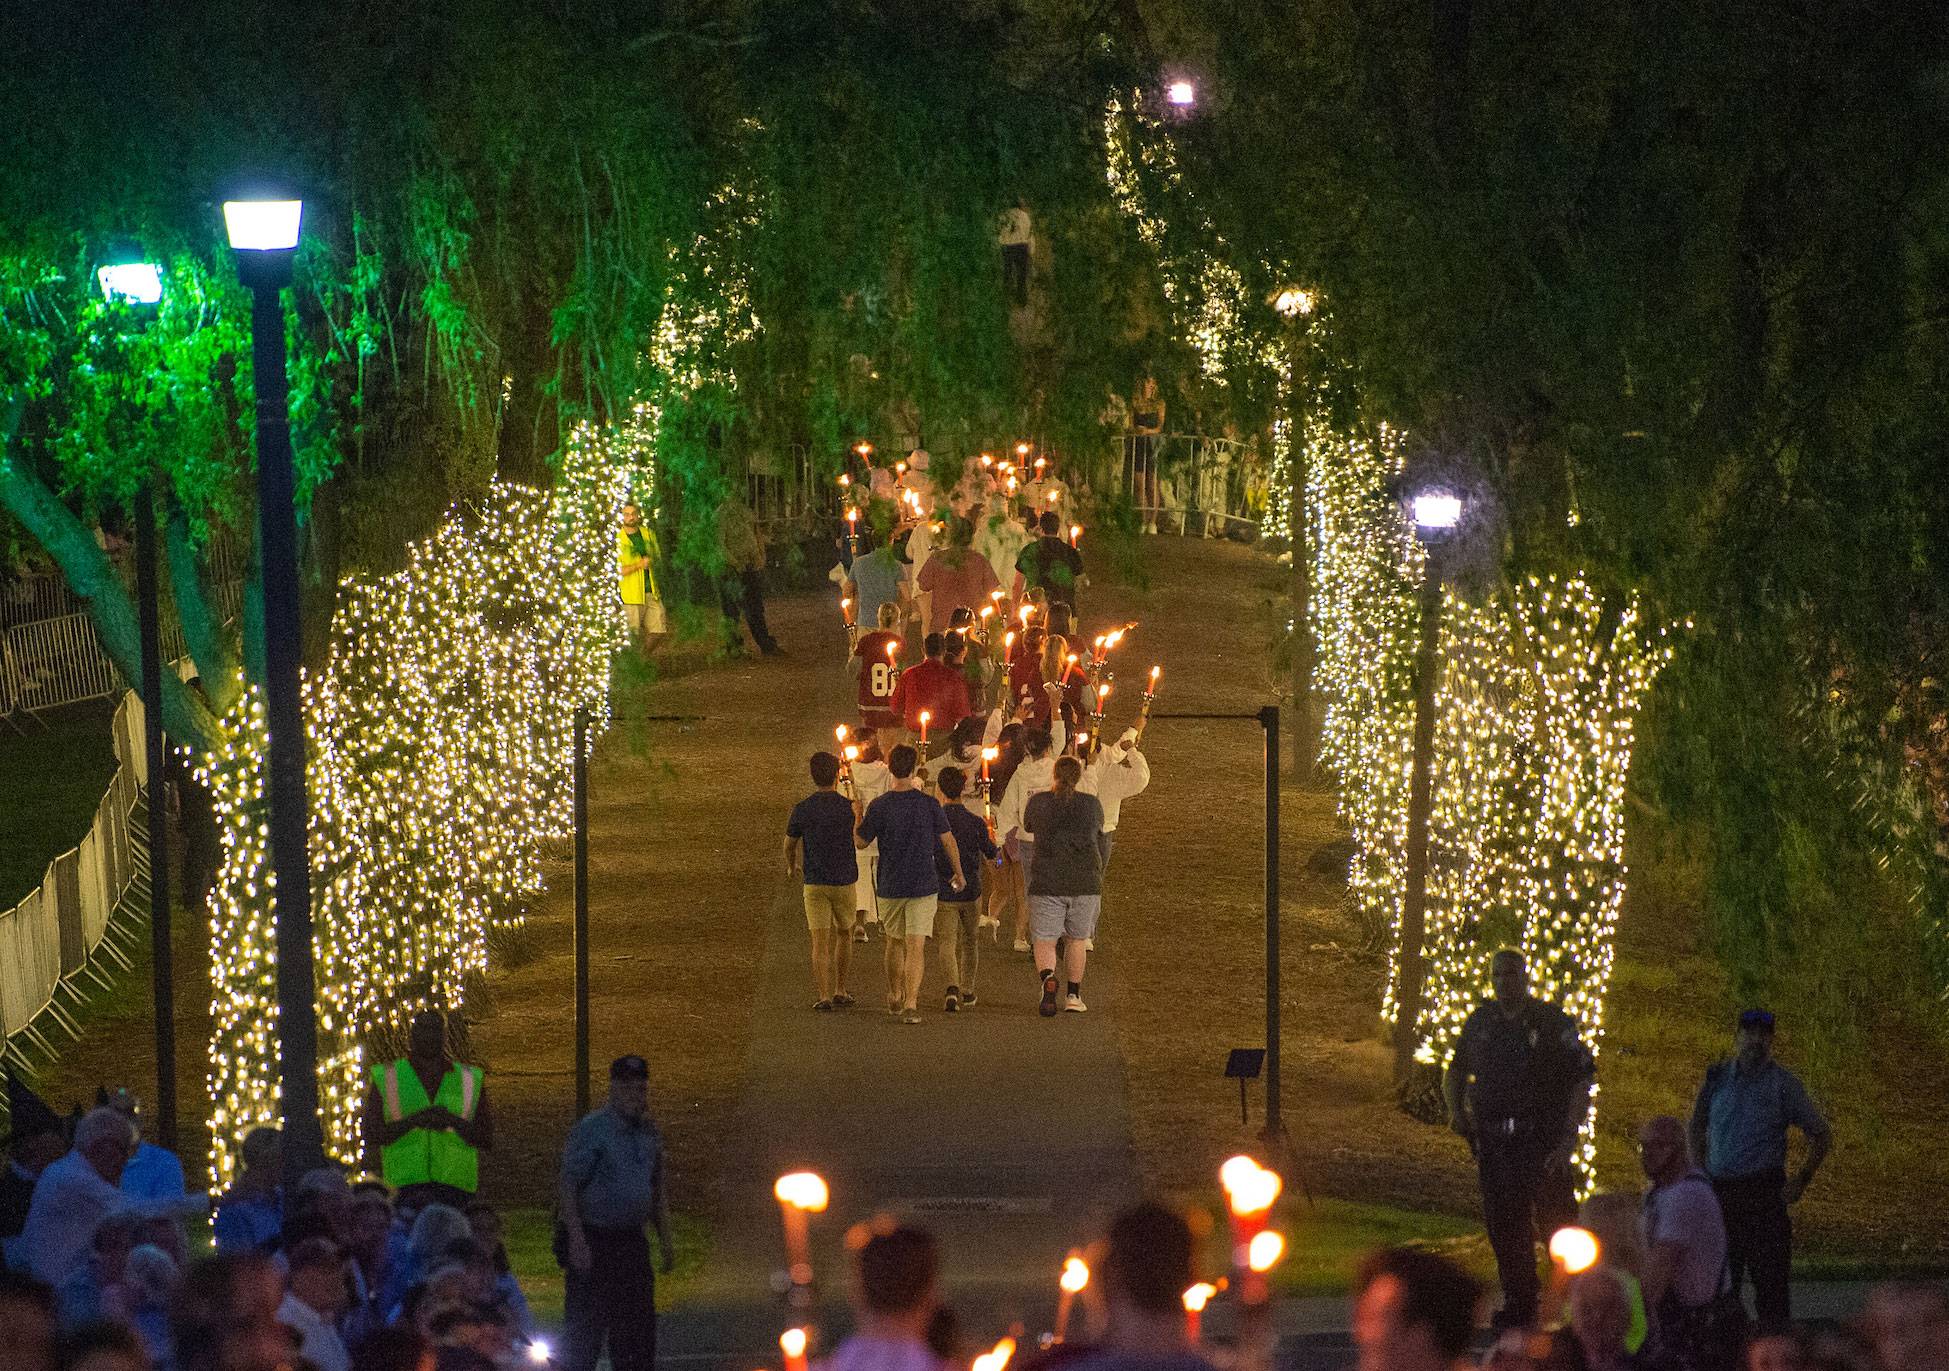 Graduates carrying torches proceed down the Willow Path, whose trees are strung with lights